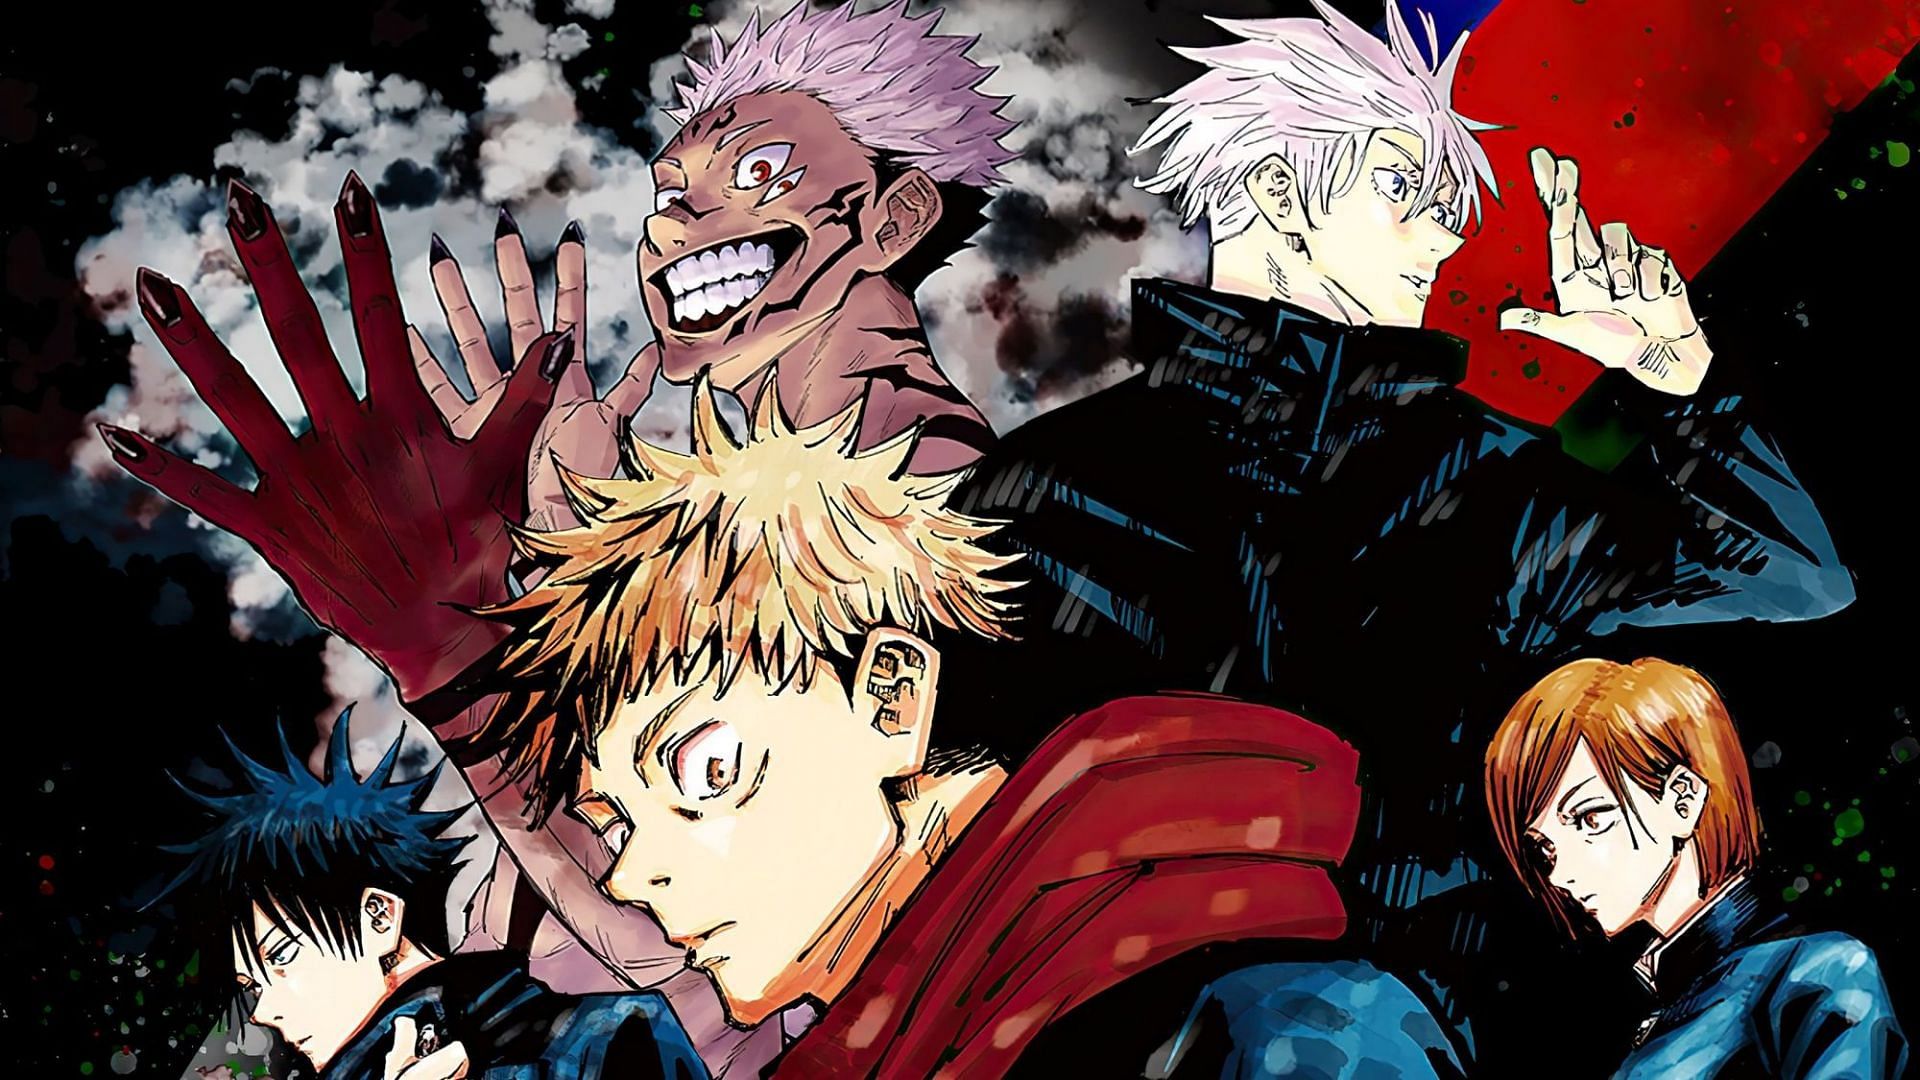 Jujutsu Kaisen chapter 200: What the influx of new players means